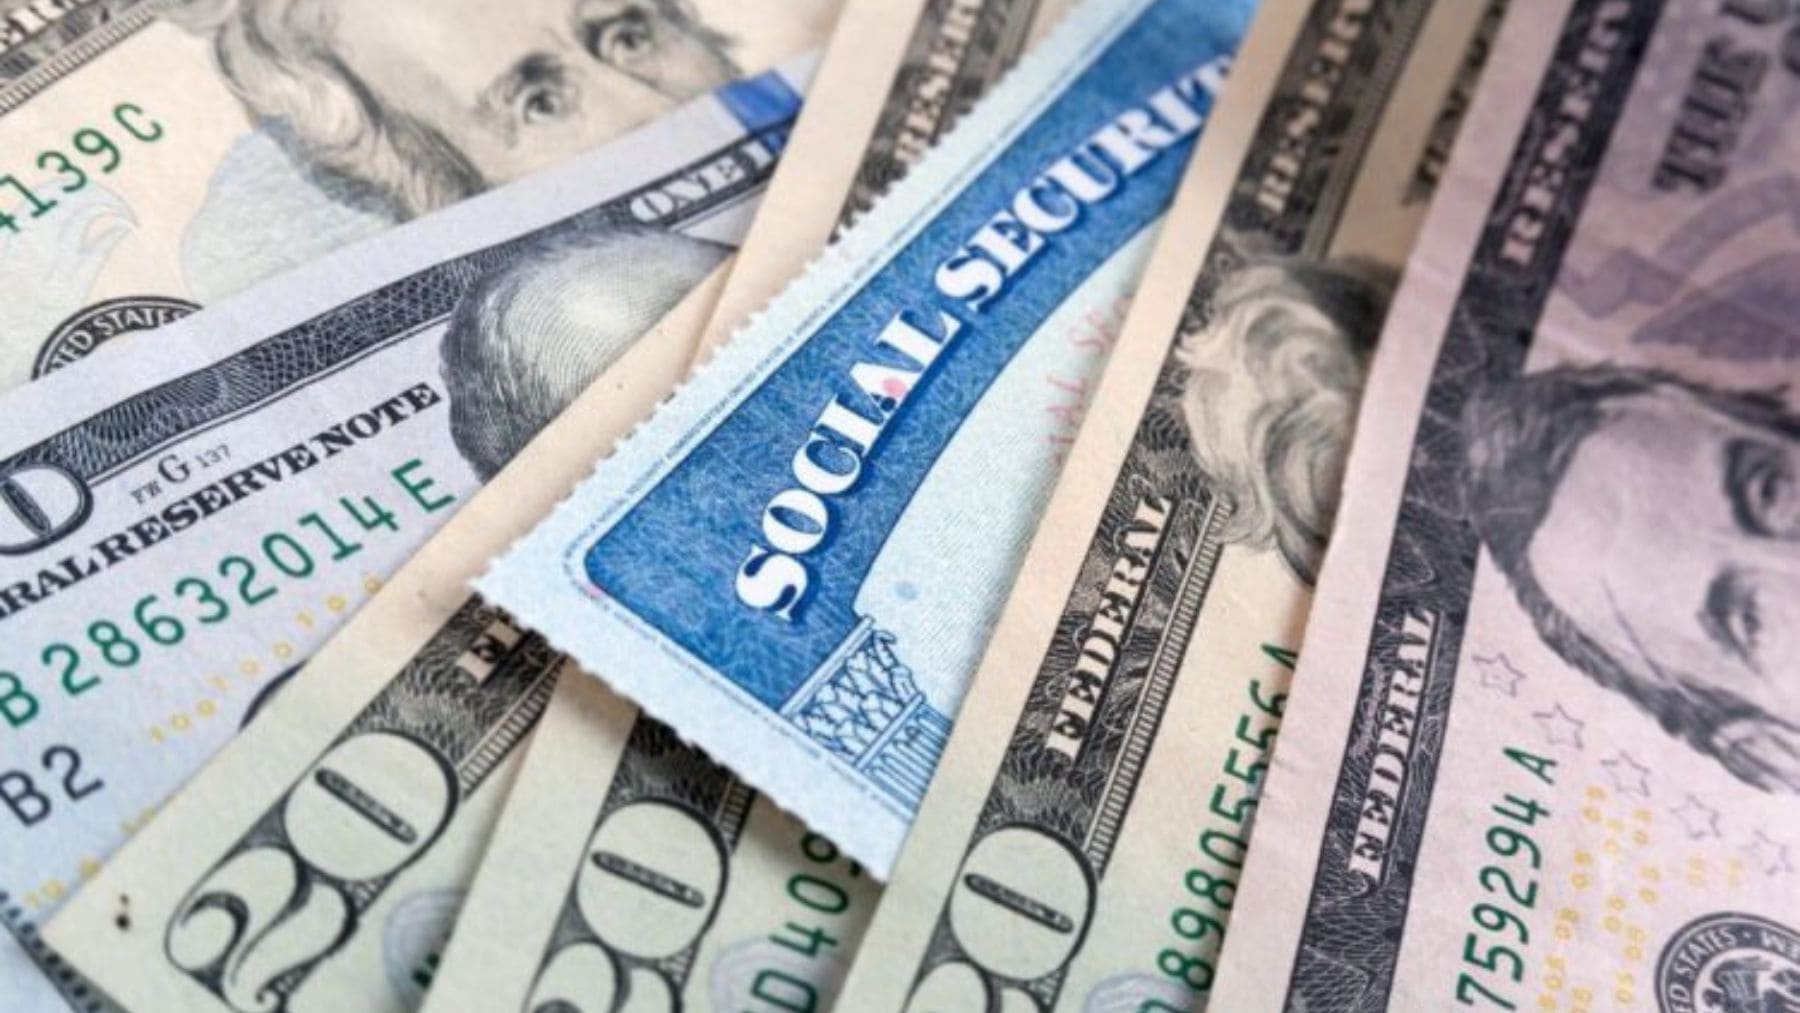 Money and a Social Security card